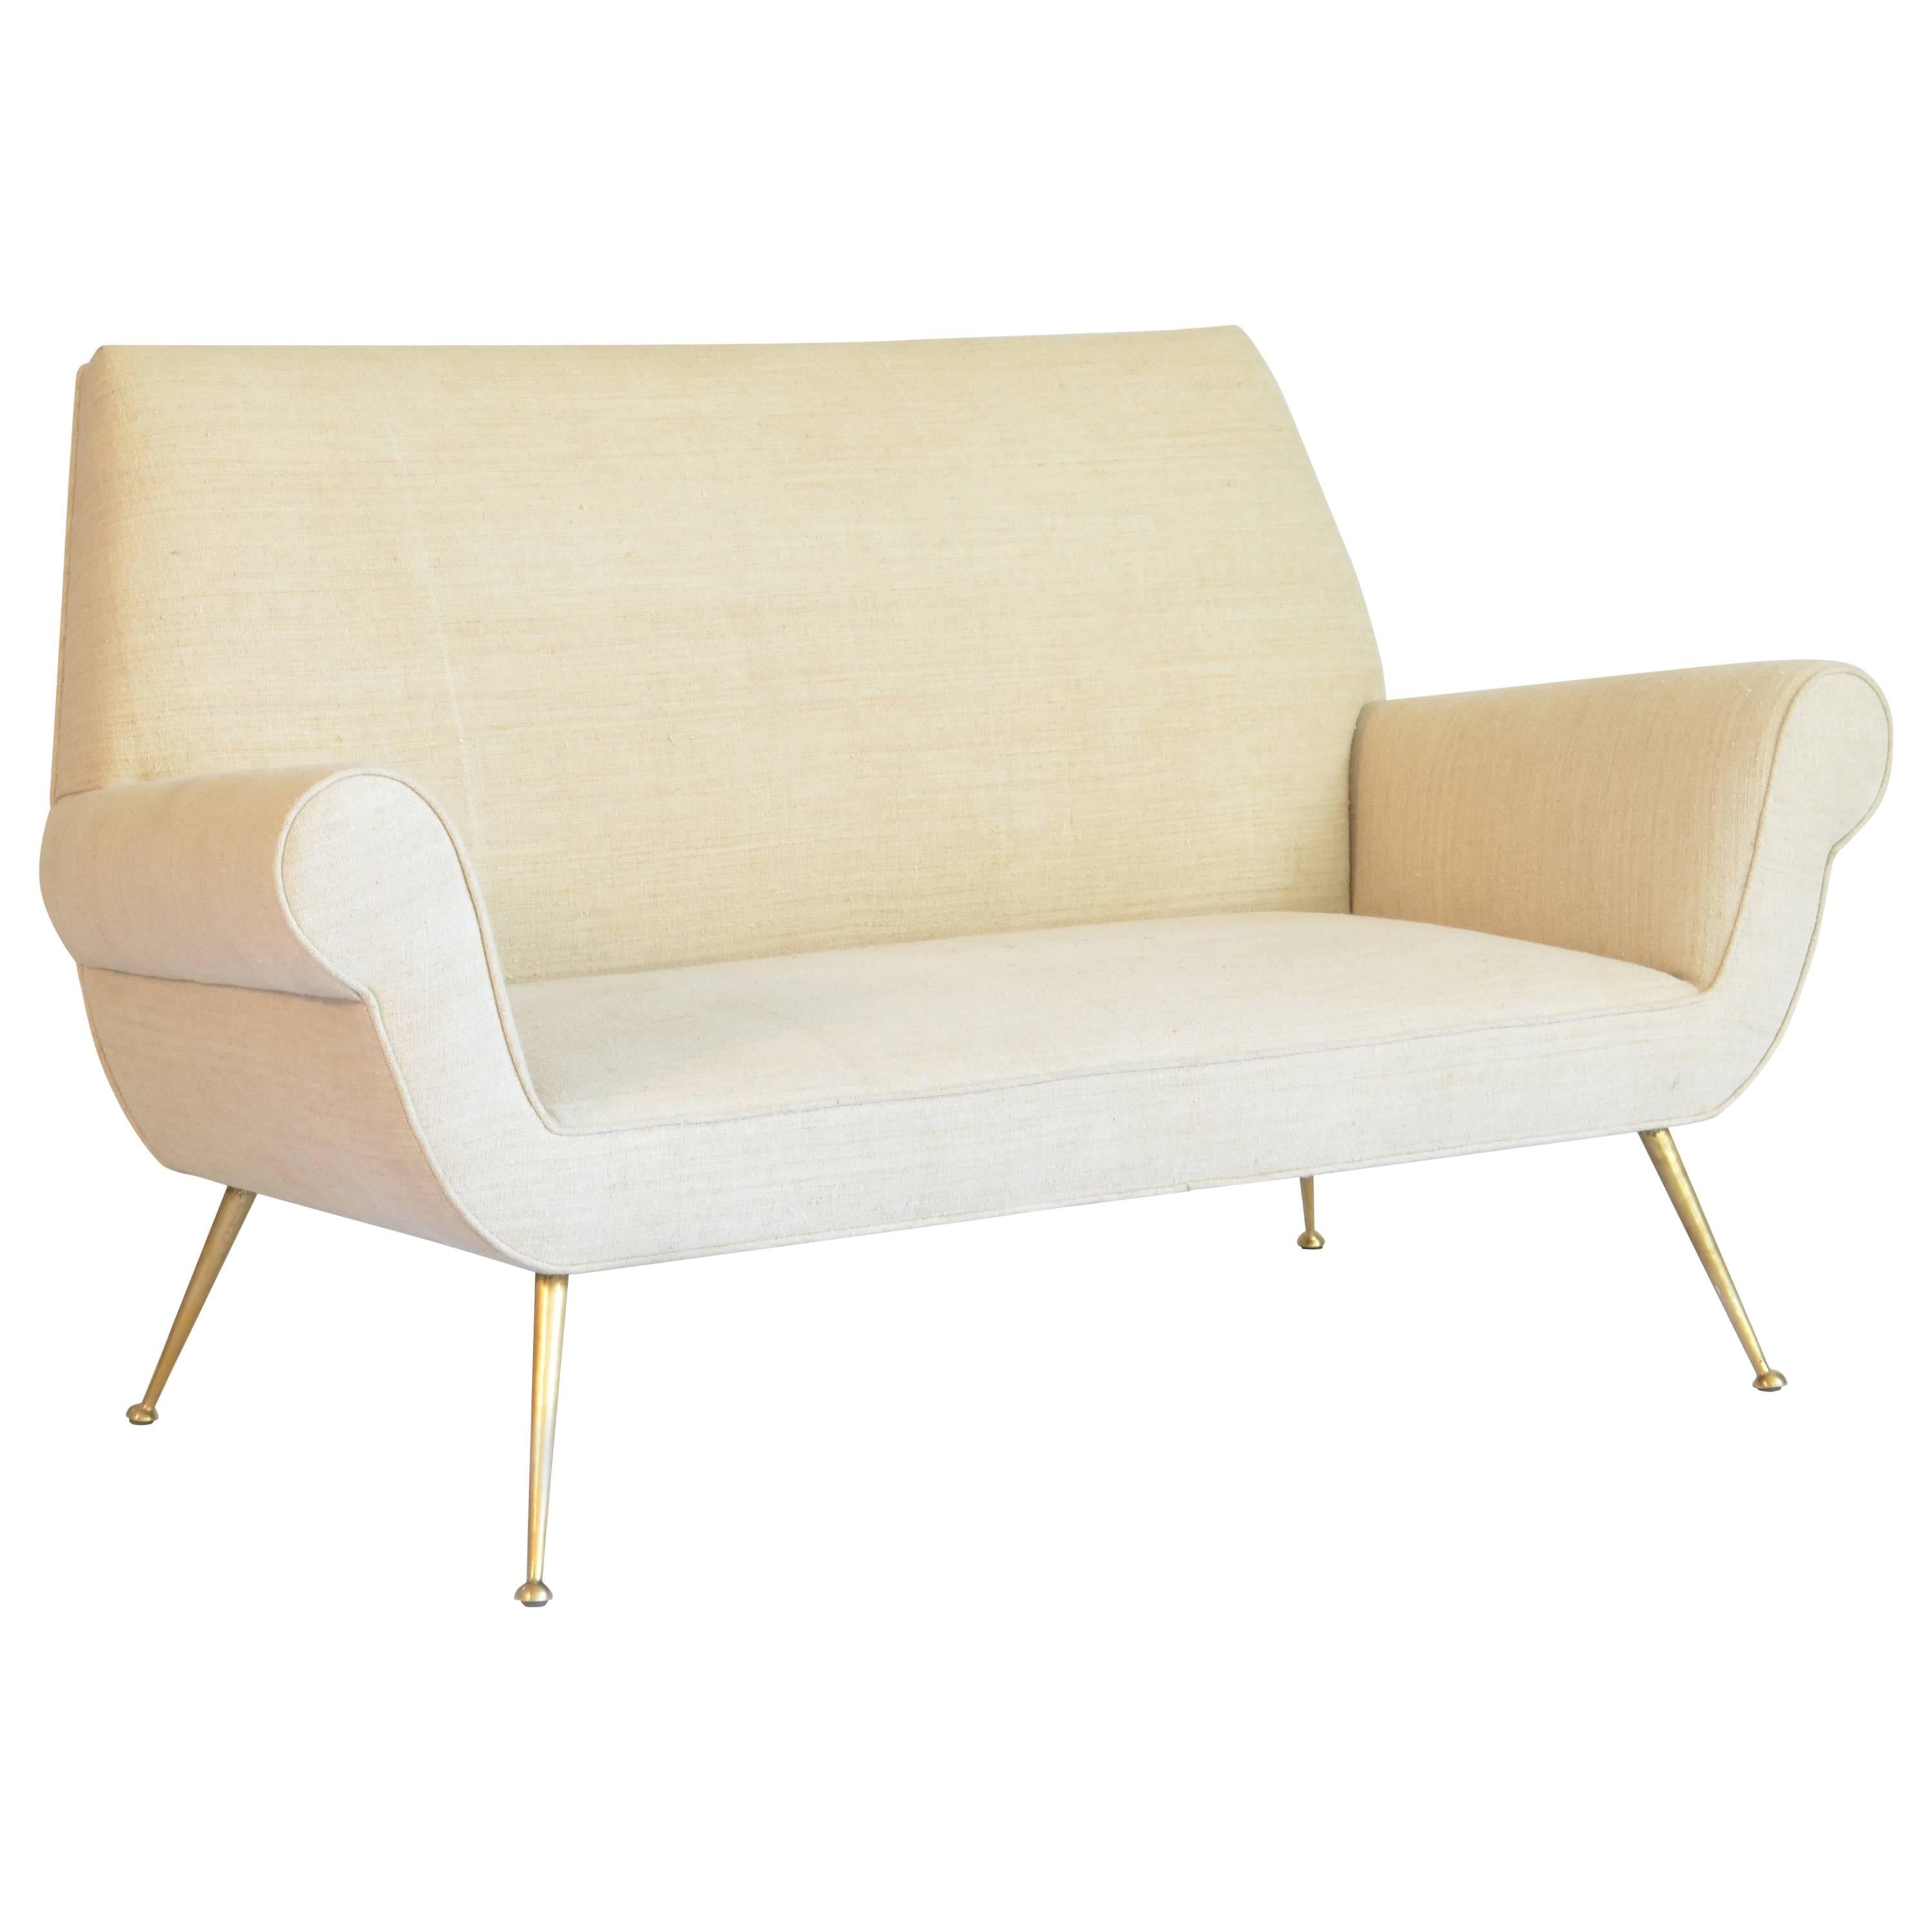 1960s Settee in Vintage French Linen with Brass Legs